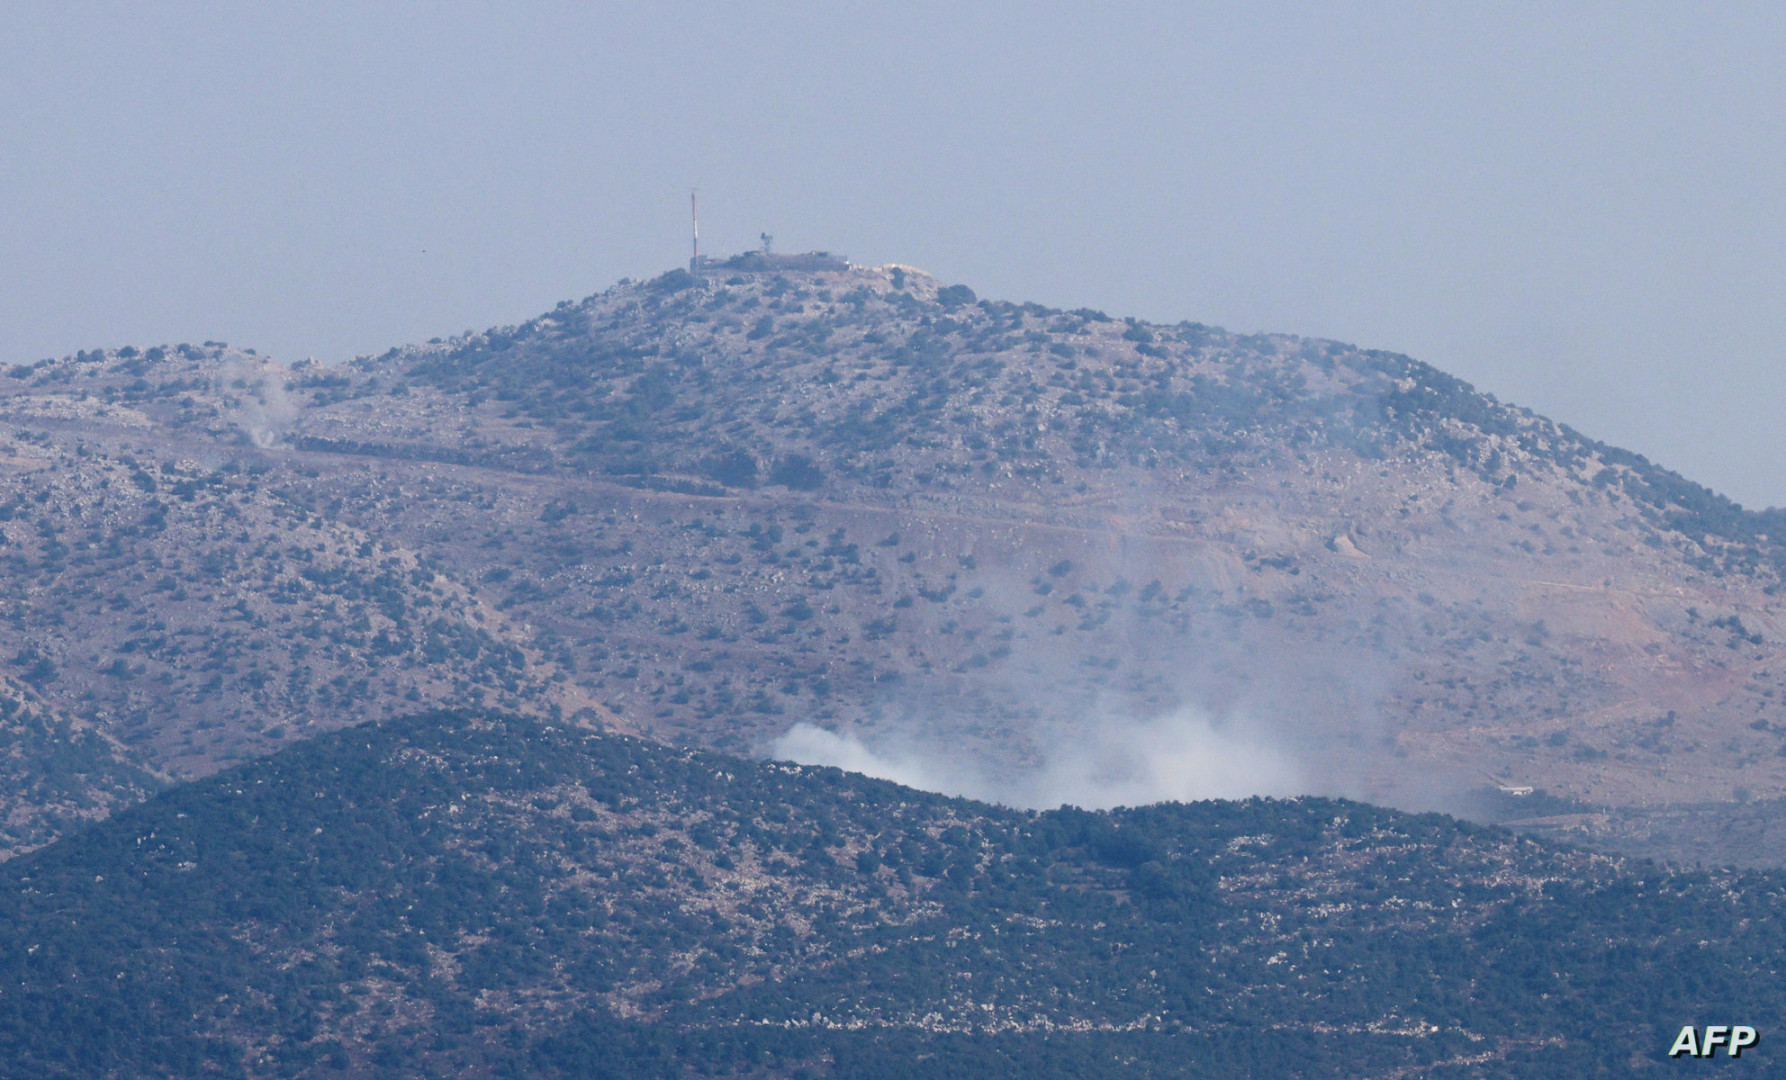 Casualties reported in a Hezbollah attack on Israel